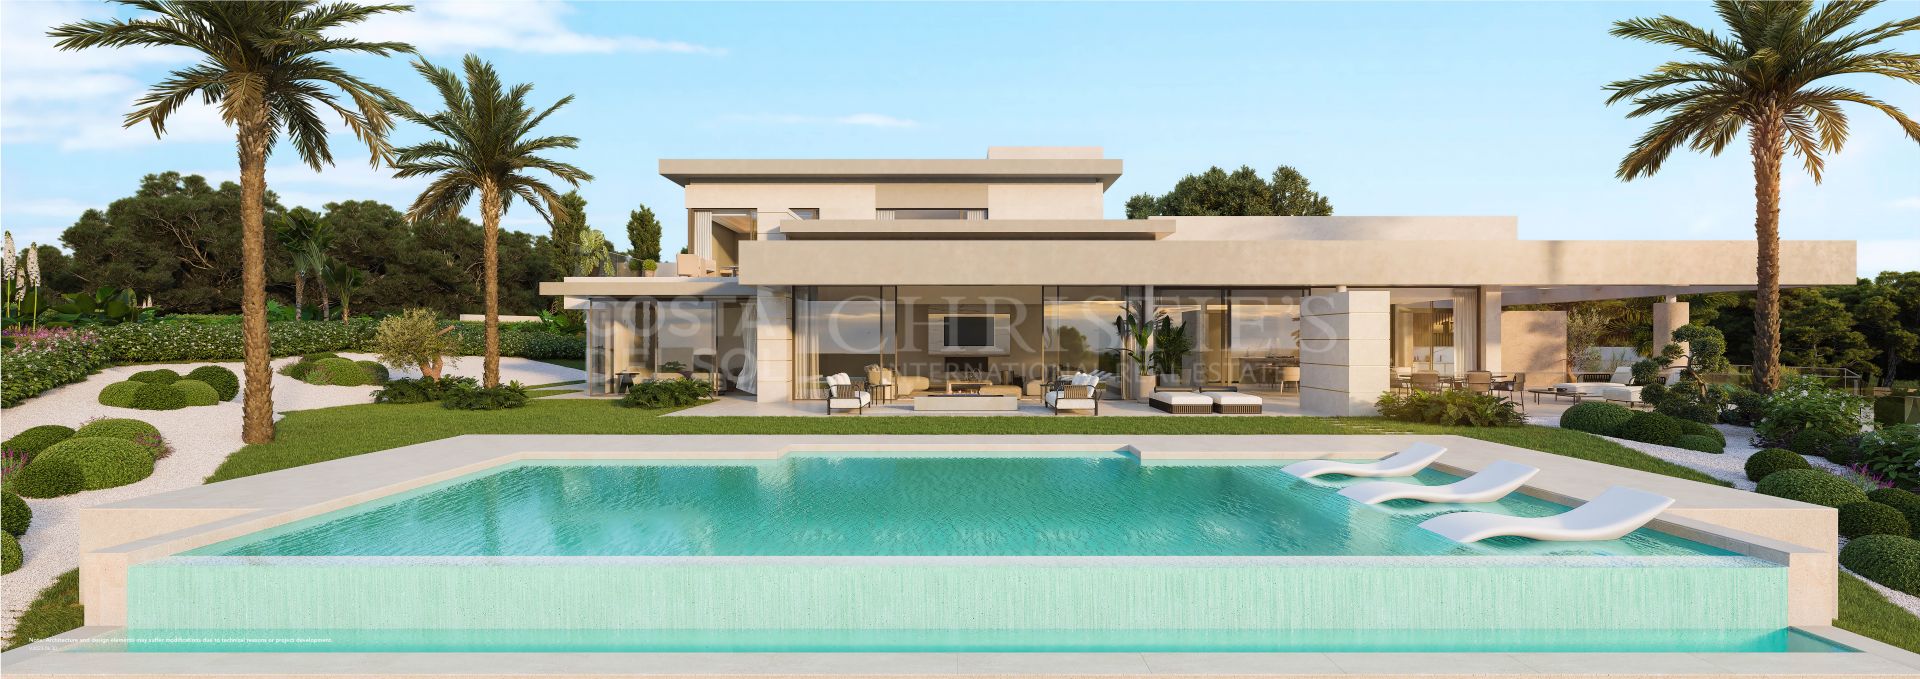 Villa 2. Exclusive residential villa in Sierra Blanca based on haute couture. | Christie’s International Real Estate